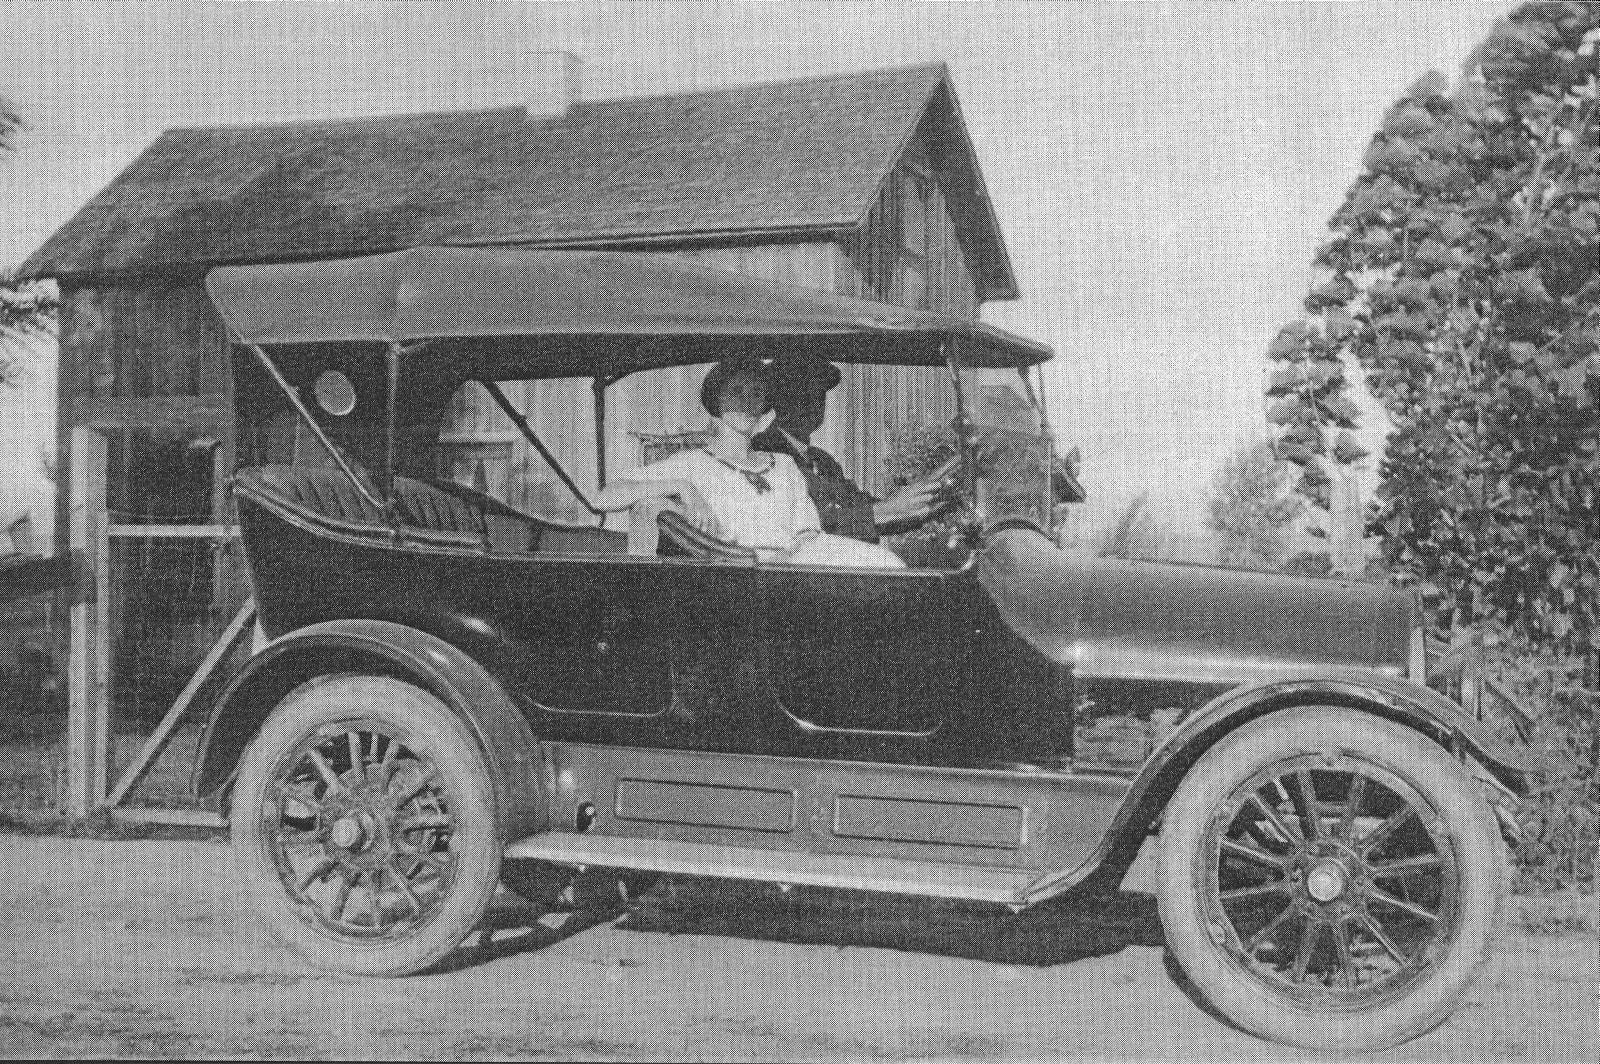 Theo and Mildred Fisher in an Overland car